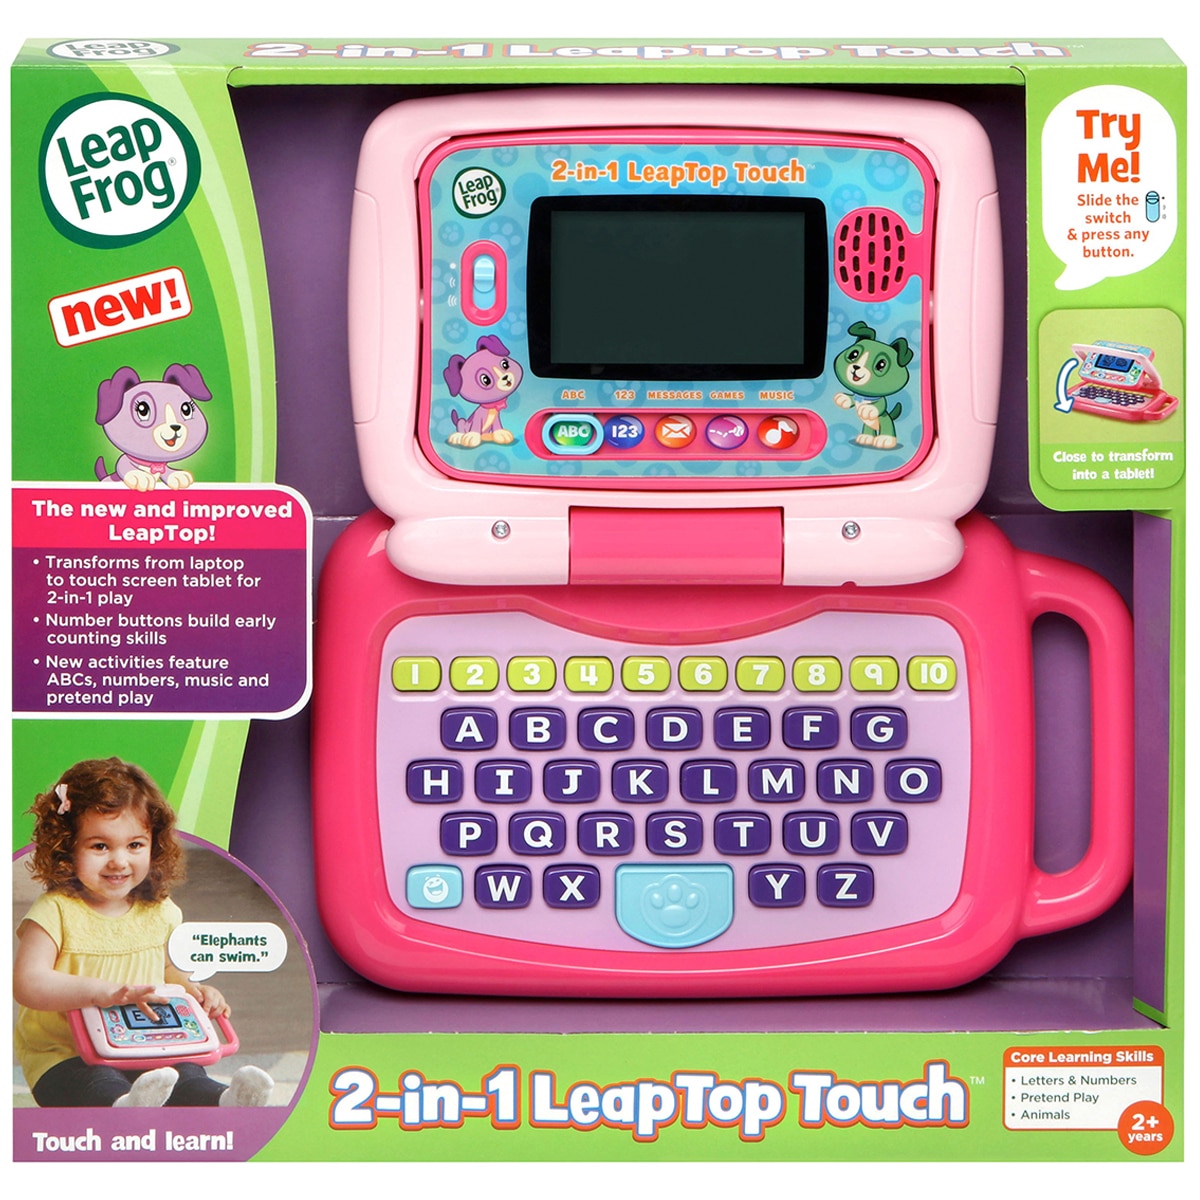 Leapfrog 2 in 1 My LeapTop Touch Laptop Pink 600957